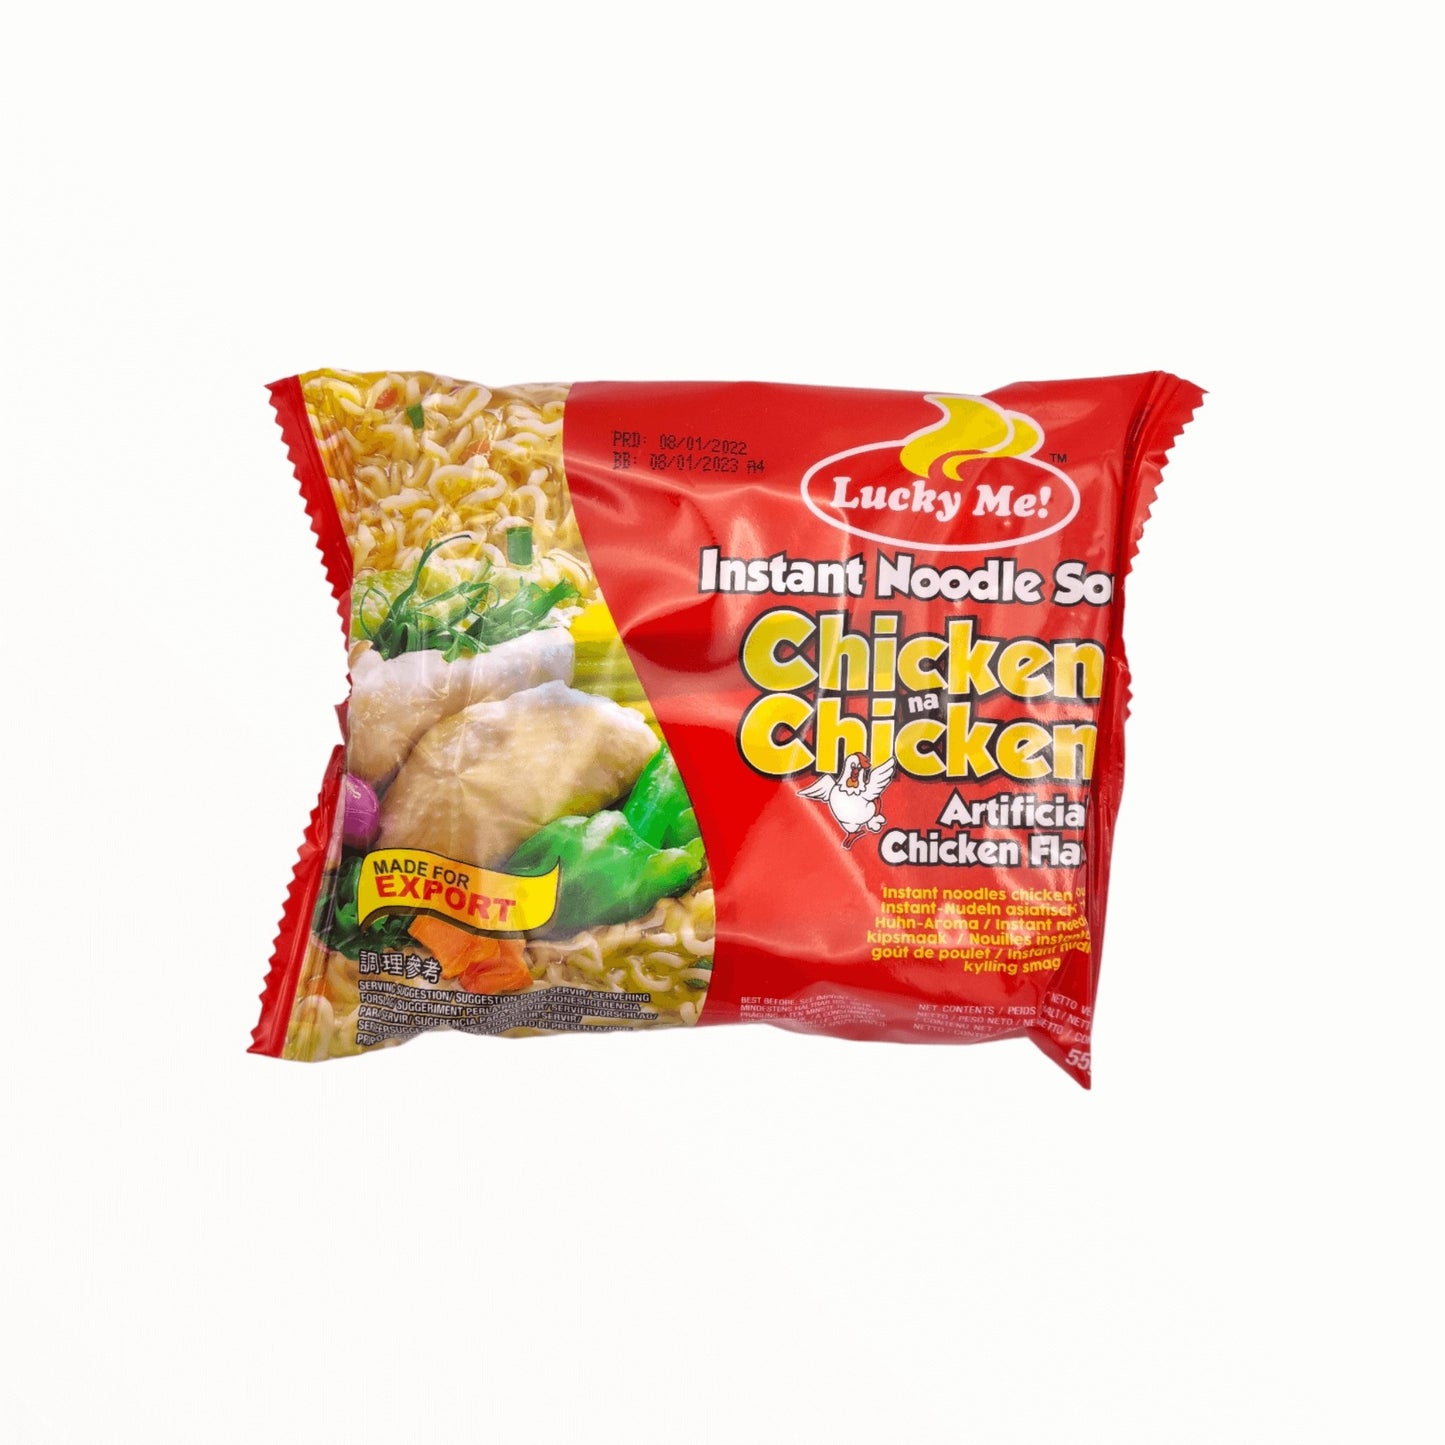 Instant Nudeln "Chicken" 55g - Mabuhay Pinoy Asia Shop